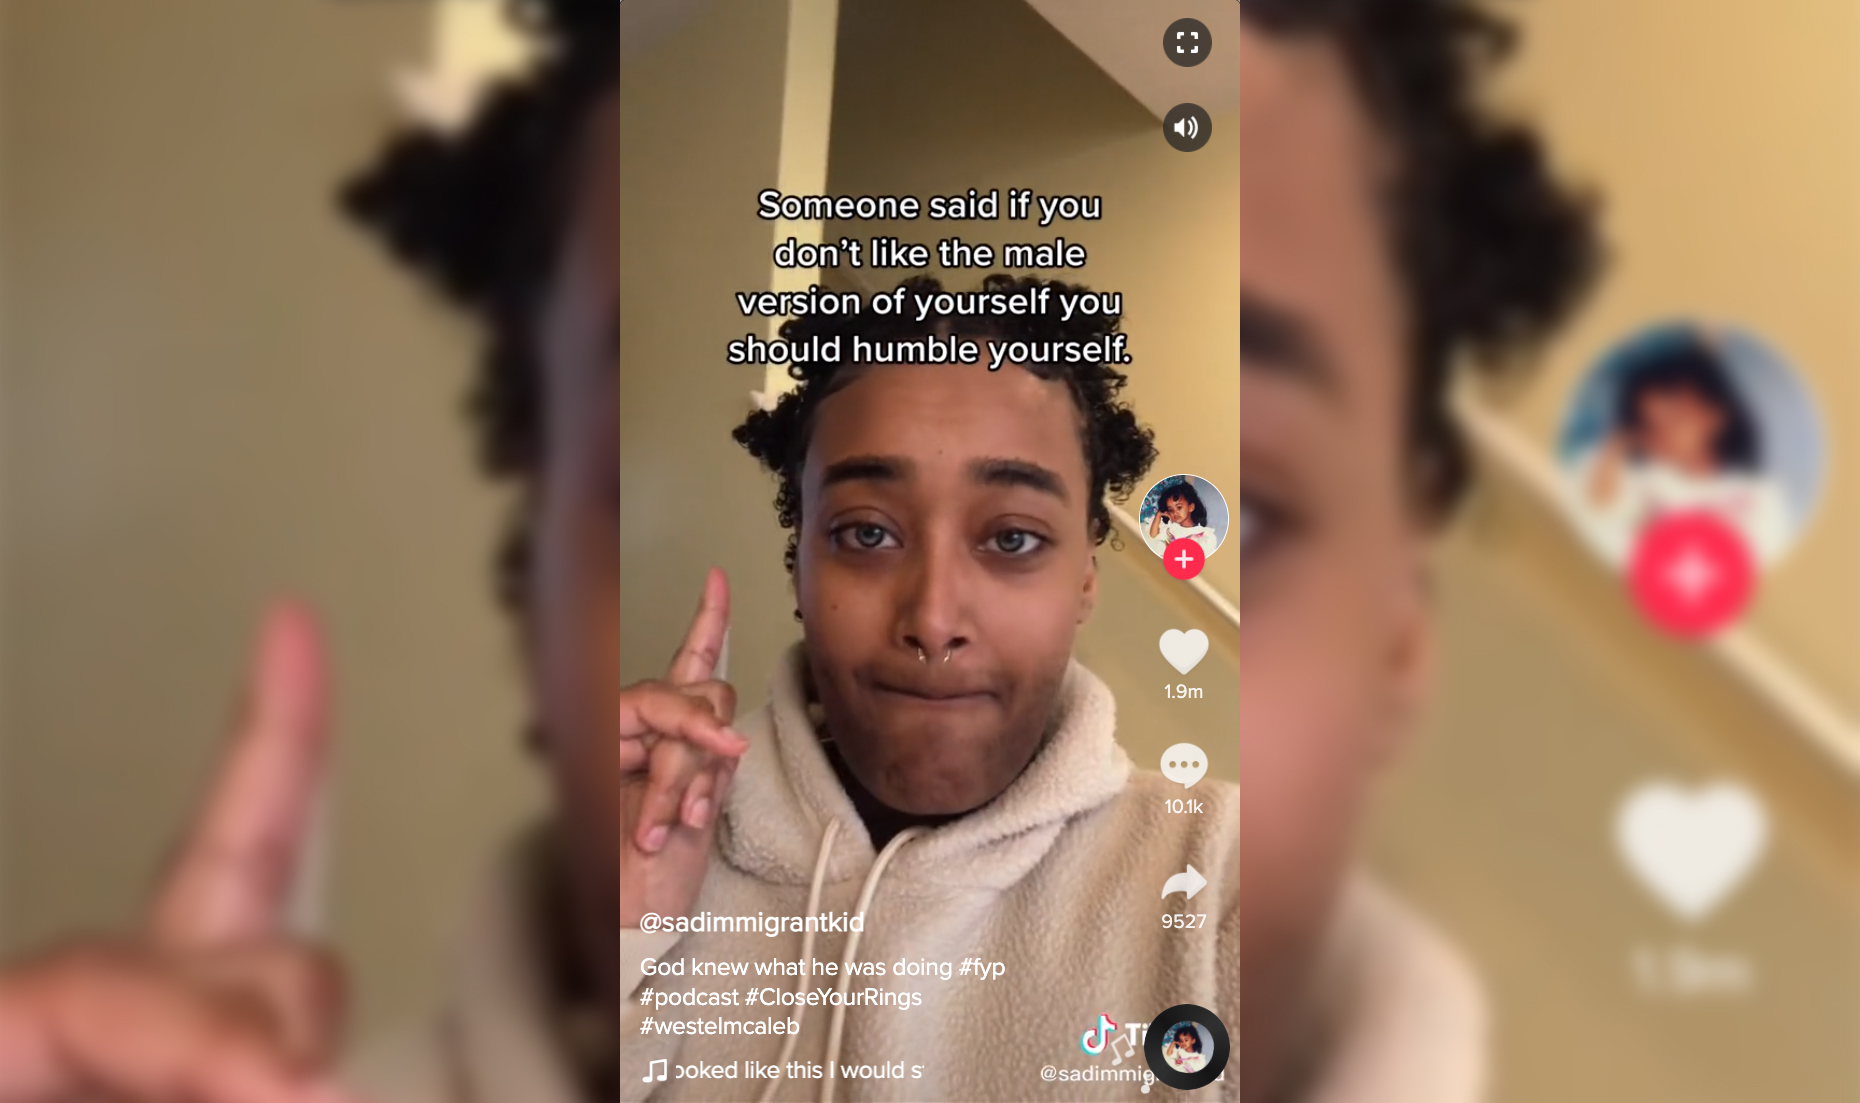 With a "beard filter", TikTok users condemn masculine podcasts